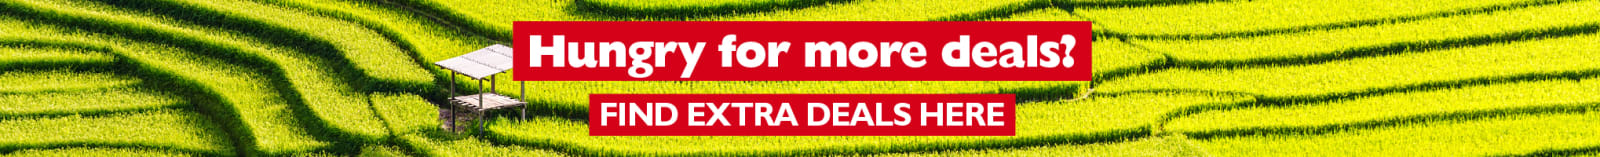 Hungry for more deals? Find extra deals here